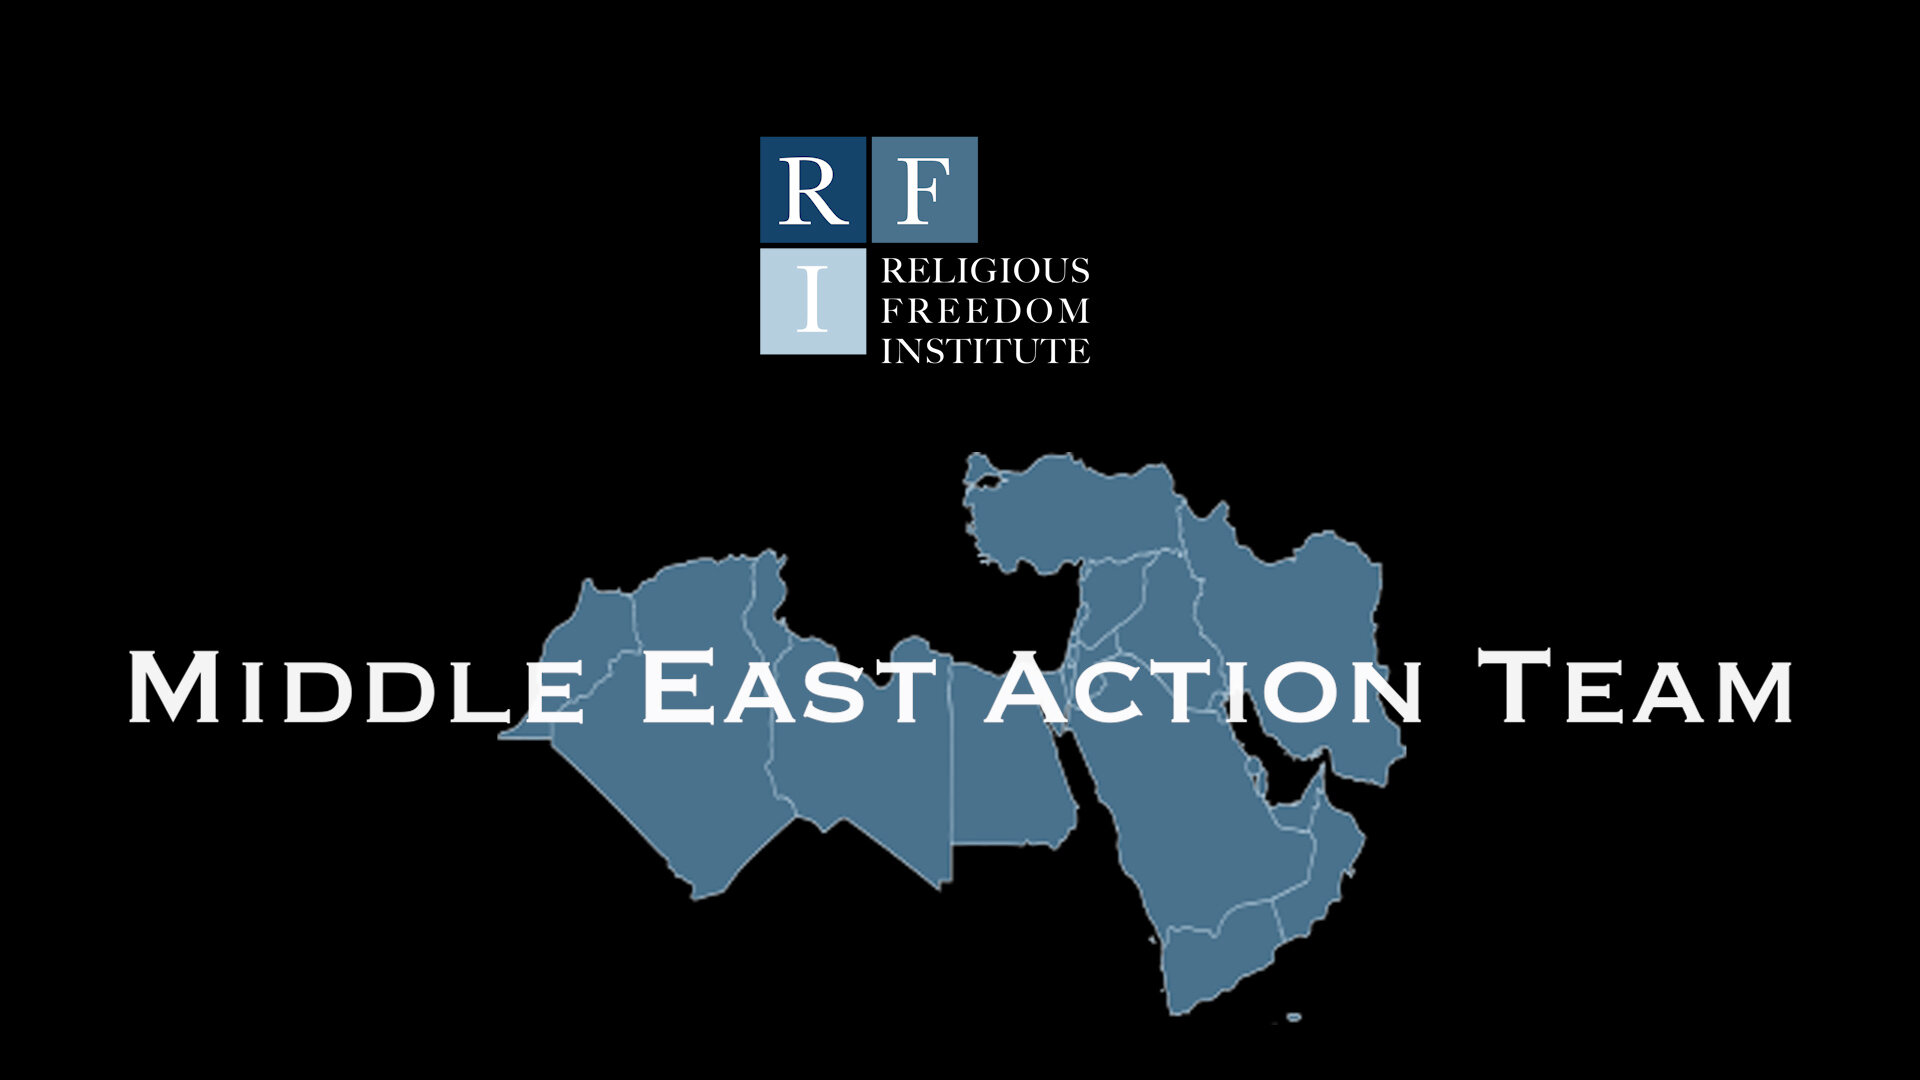 Featured image for “Interview | Jeremy Barker, Director of RFI Middle East Action Team, interviews Nermien Riad, Founder of Coptic Orphans”